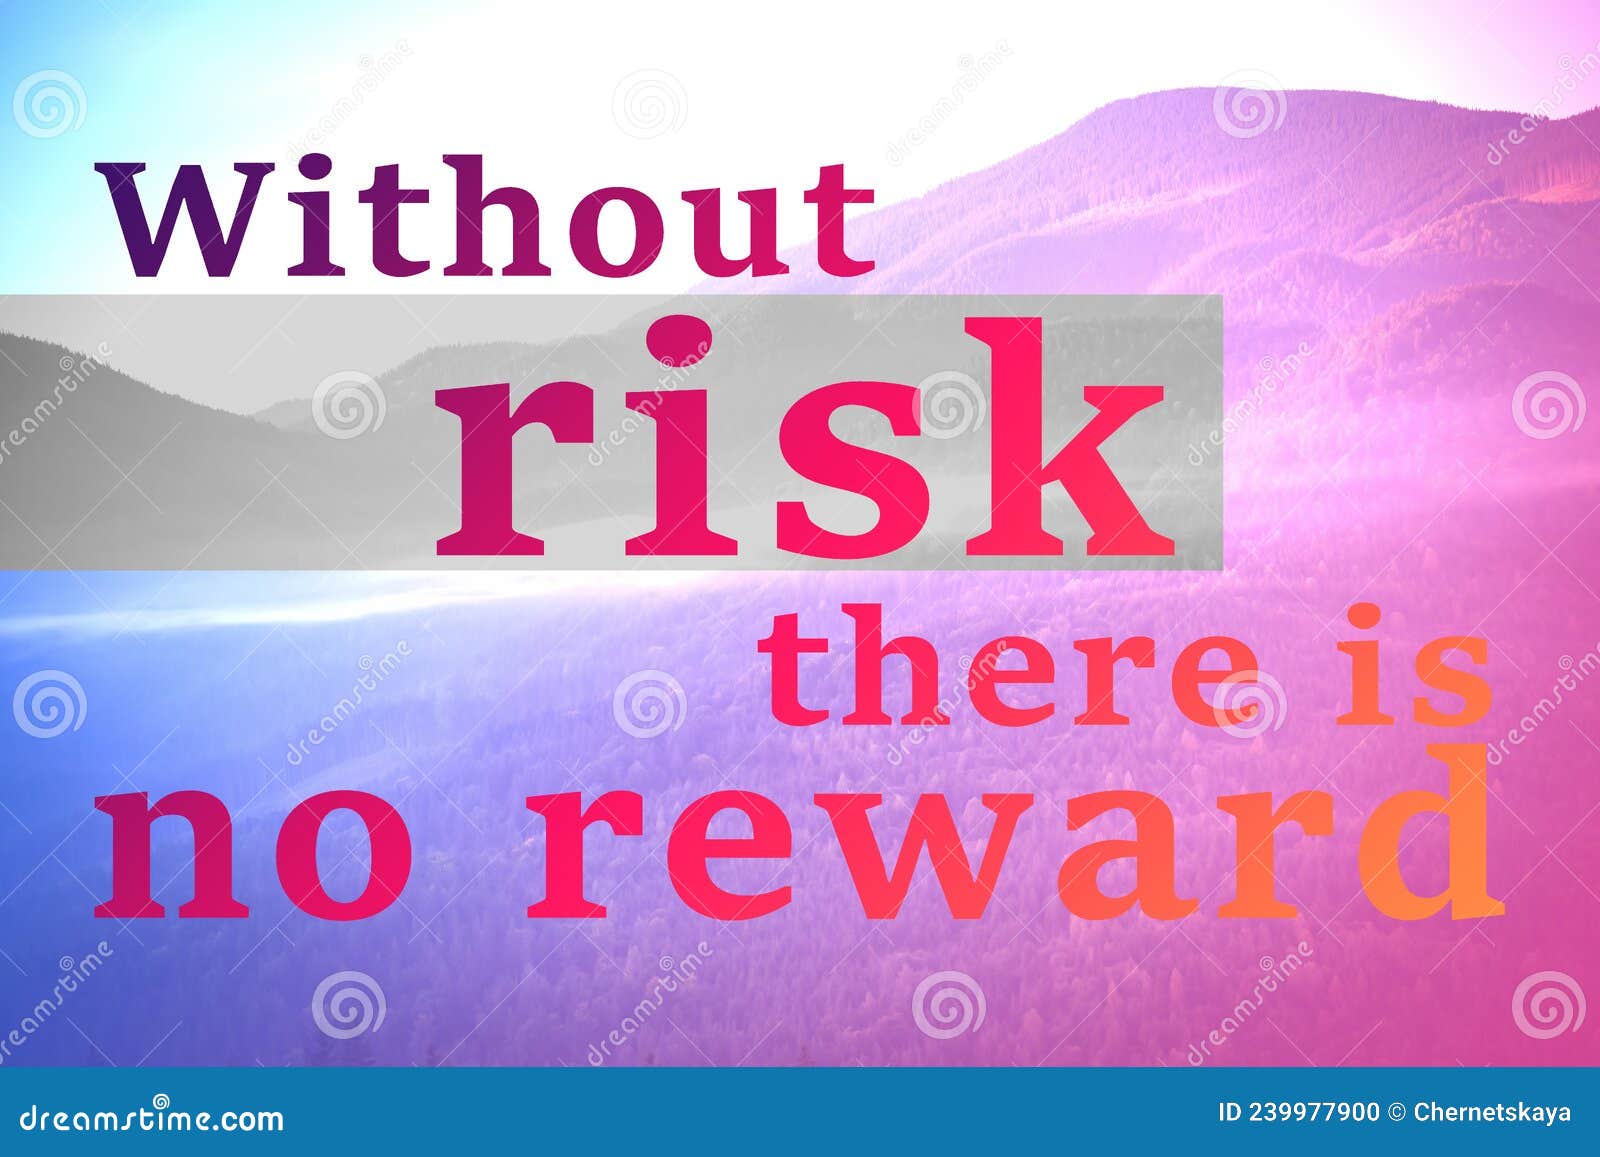 without risk there is no reward. inspirational quote motivating to be venturous and to make attempts towards reaching goals. text